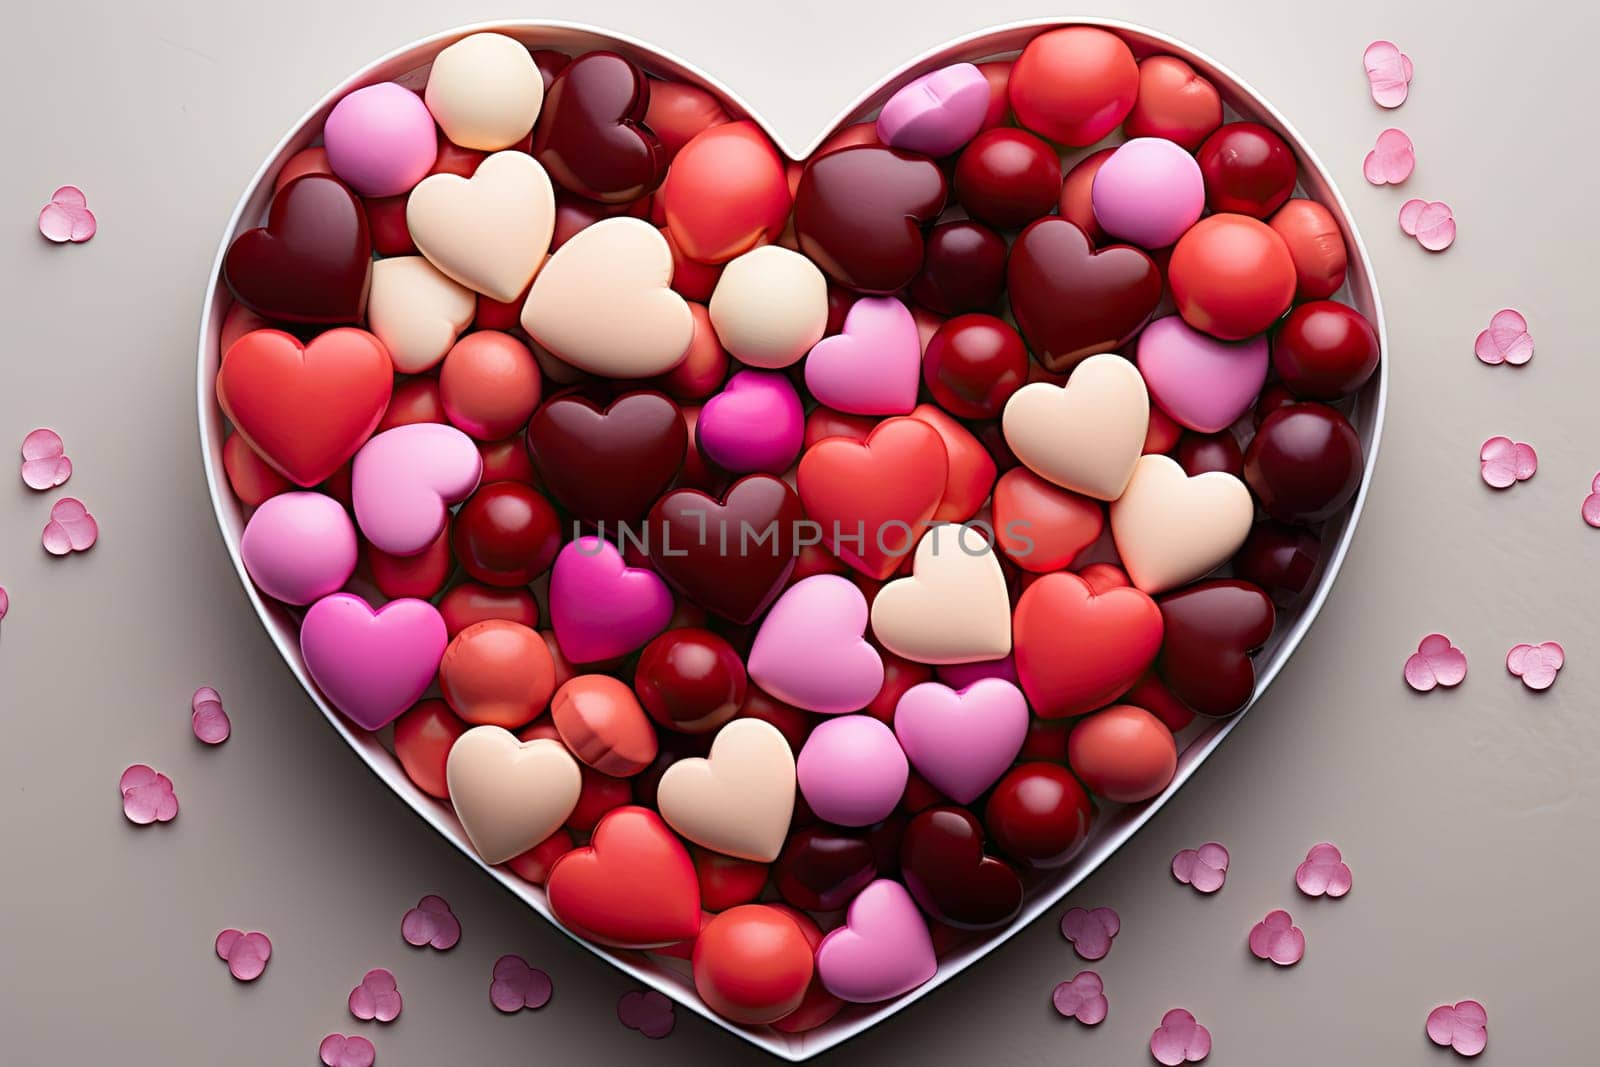 a heart shaped box filled with hearts on a gray surface, surrounded by scattered pink and red hearts for valentine's day